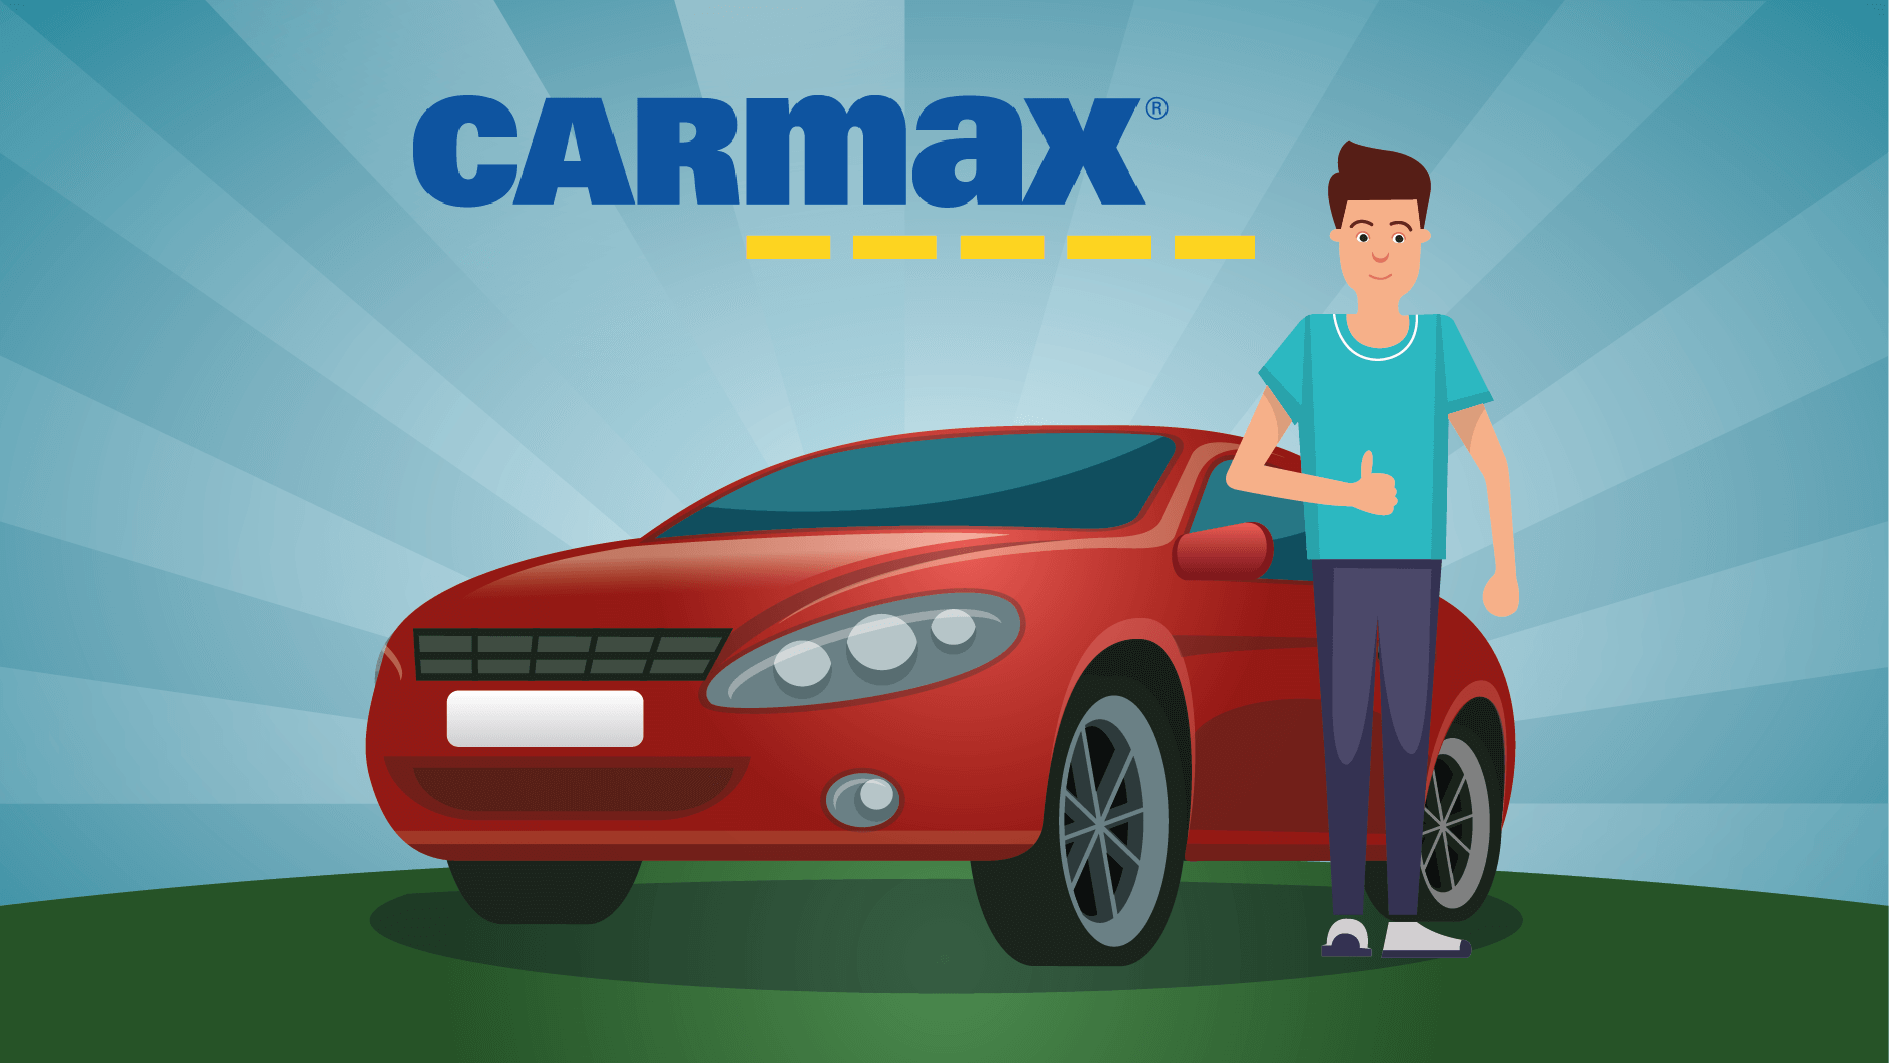 Carmax® Review: A Good Choice for Your Next Car Purchase?